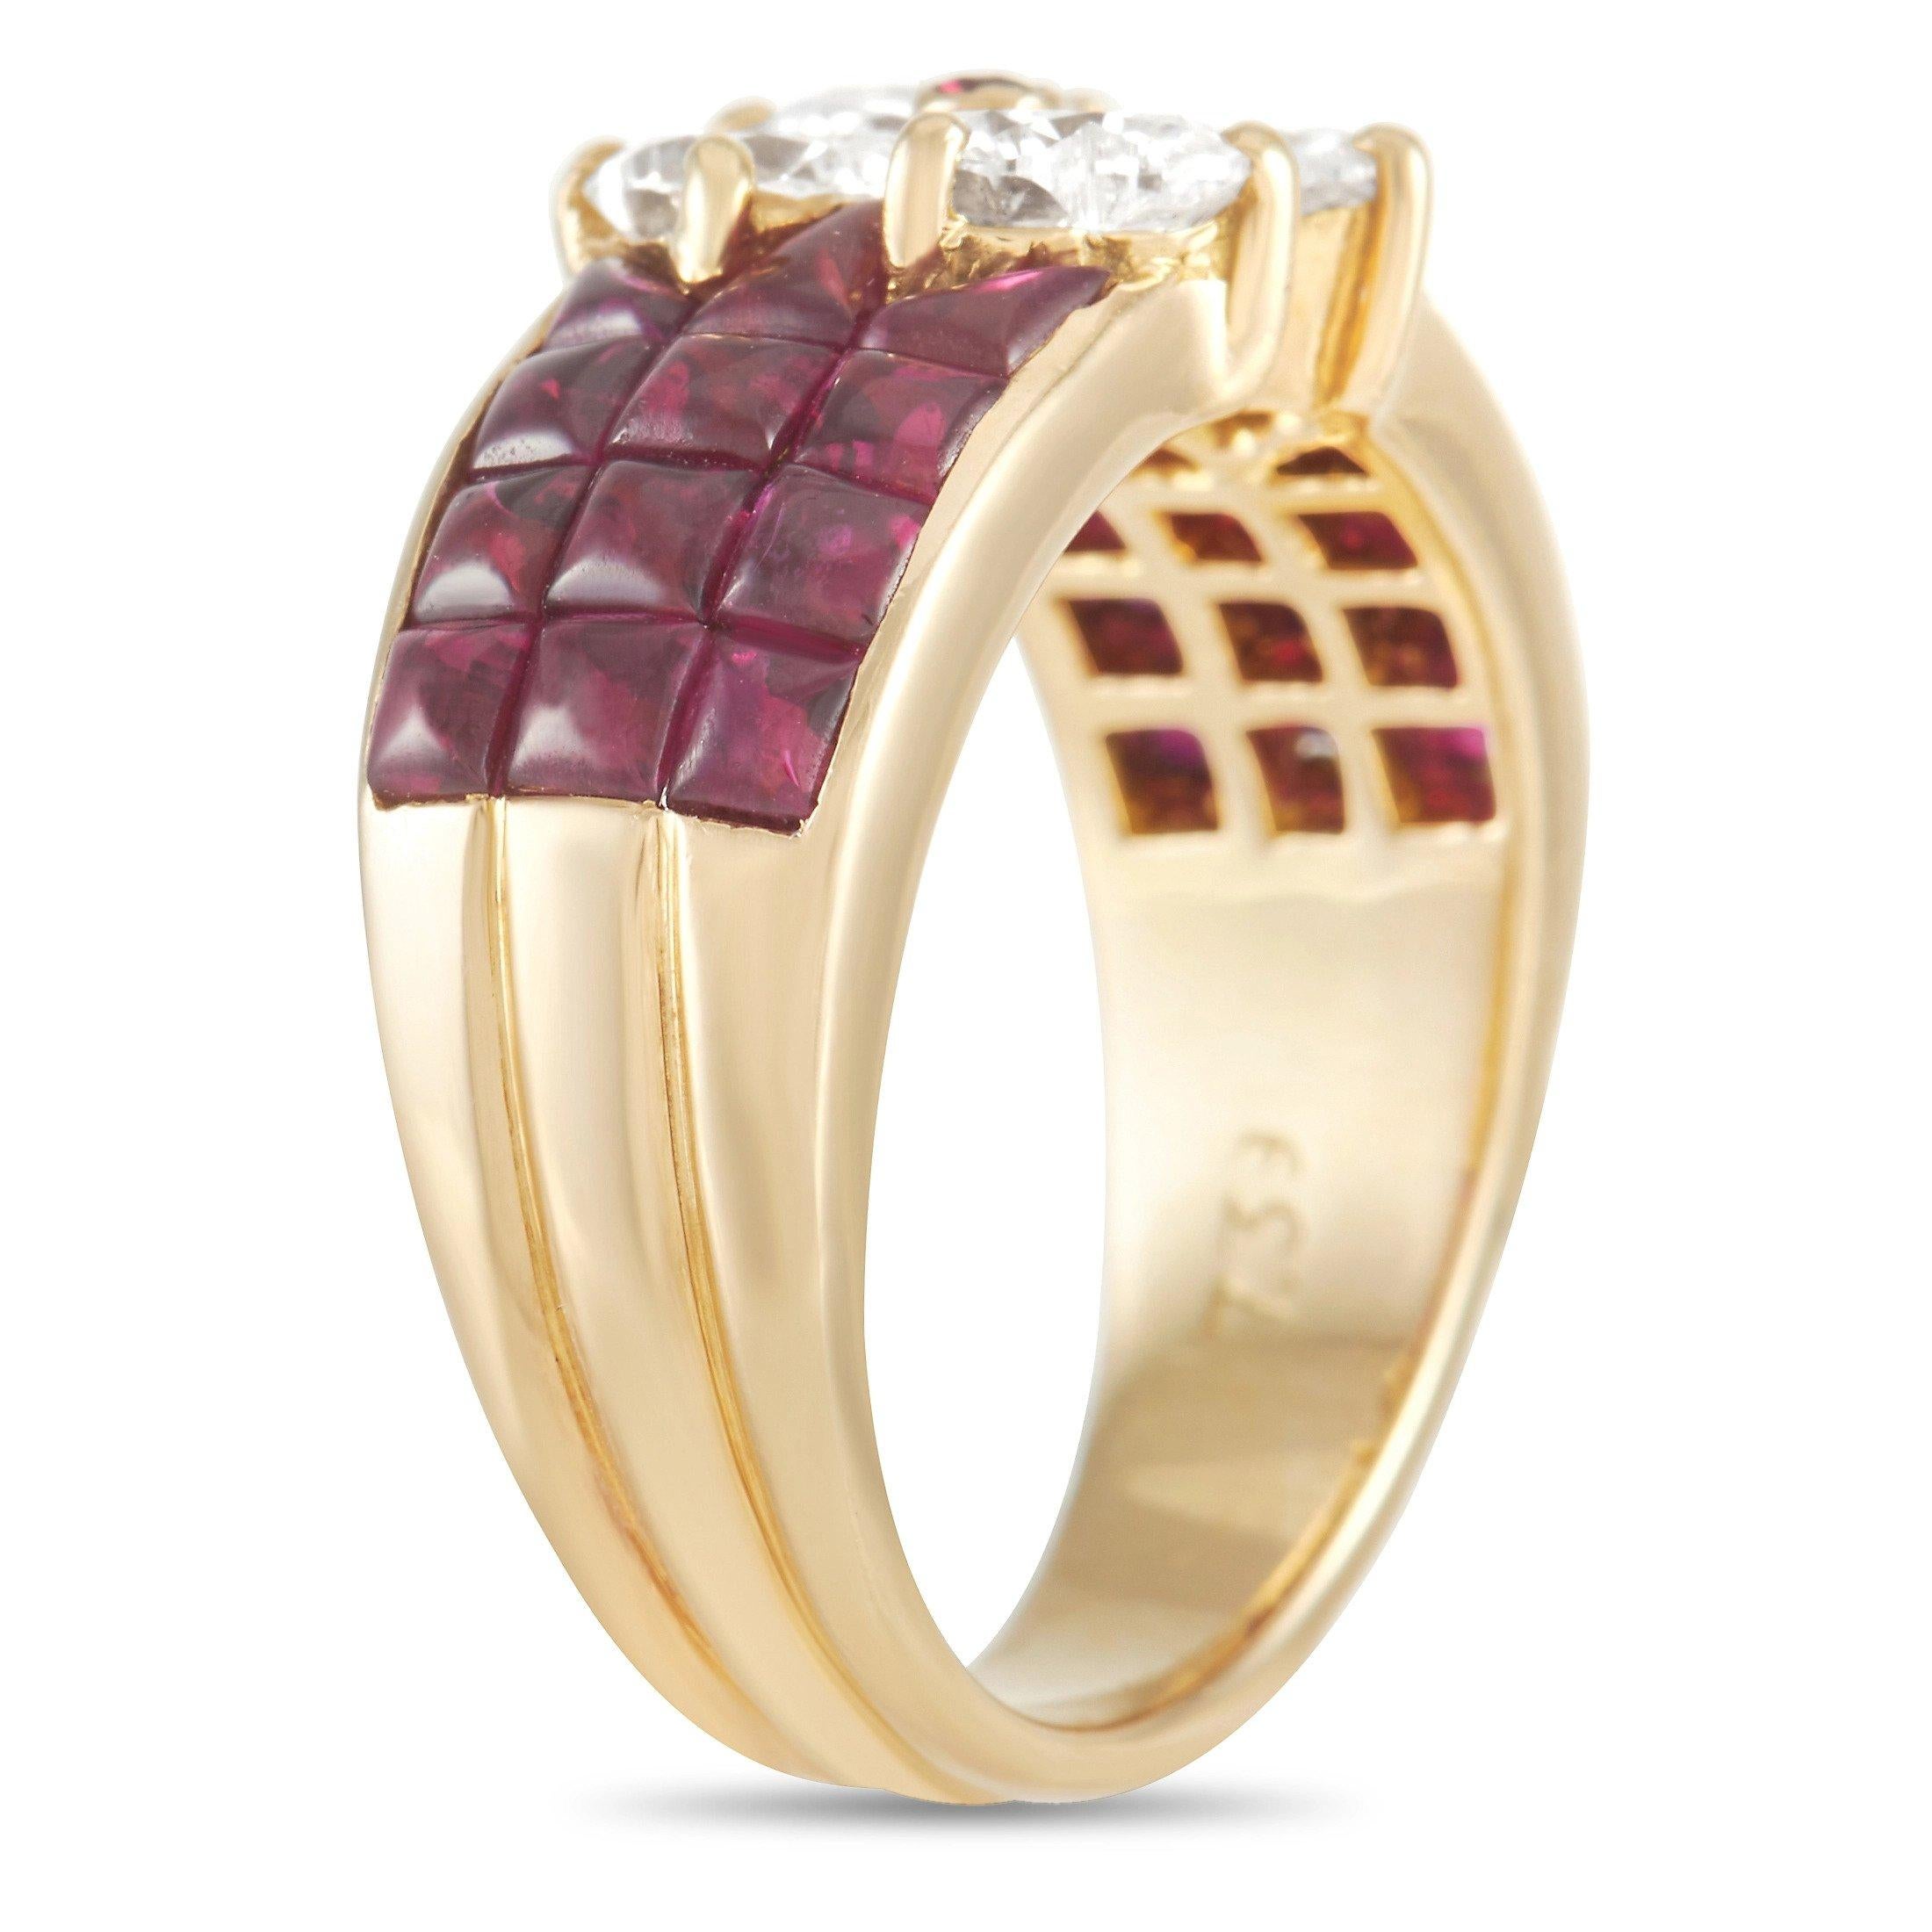 A scintillating array of gemstones make this piece from luxury brand Van Cleef & Arpels impossible to ignore. It’s covered in square-cut rubies with a total weight of 2.00 carats. At the center, heart-shaped diamonds totaling 2.00 carats come